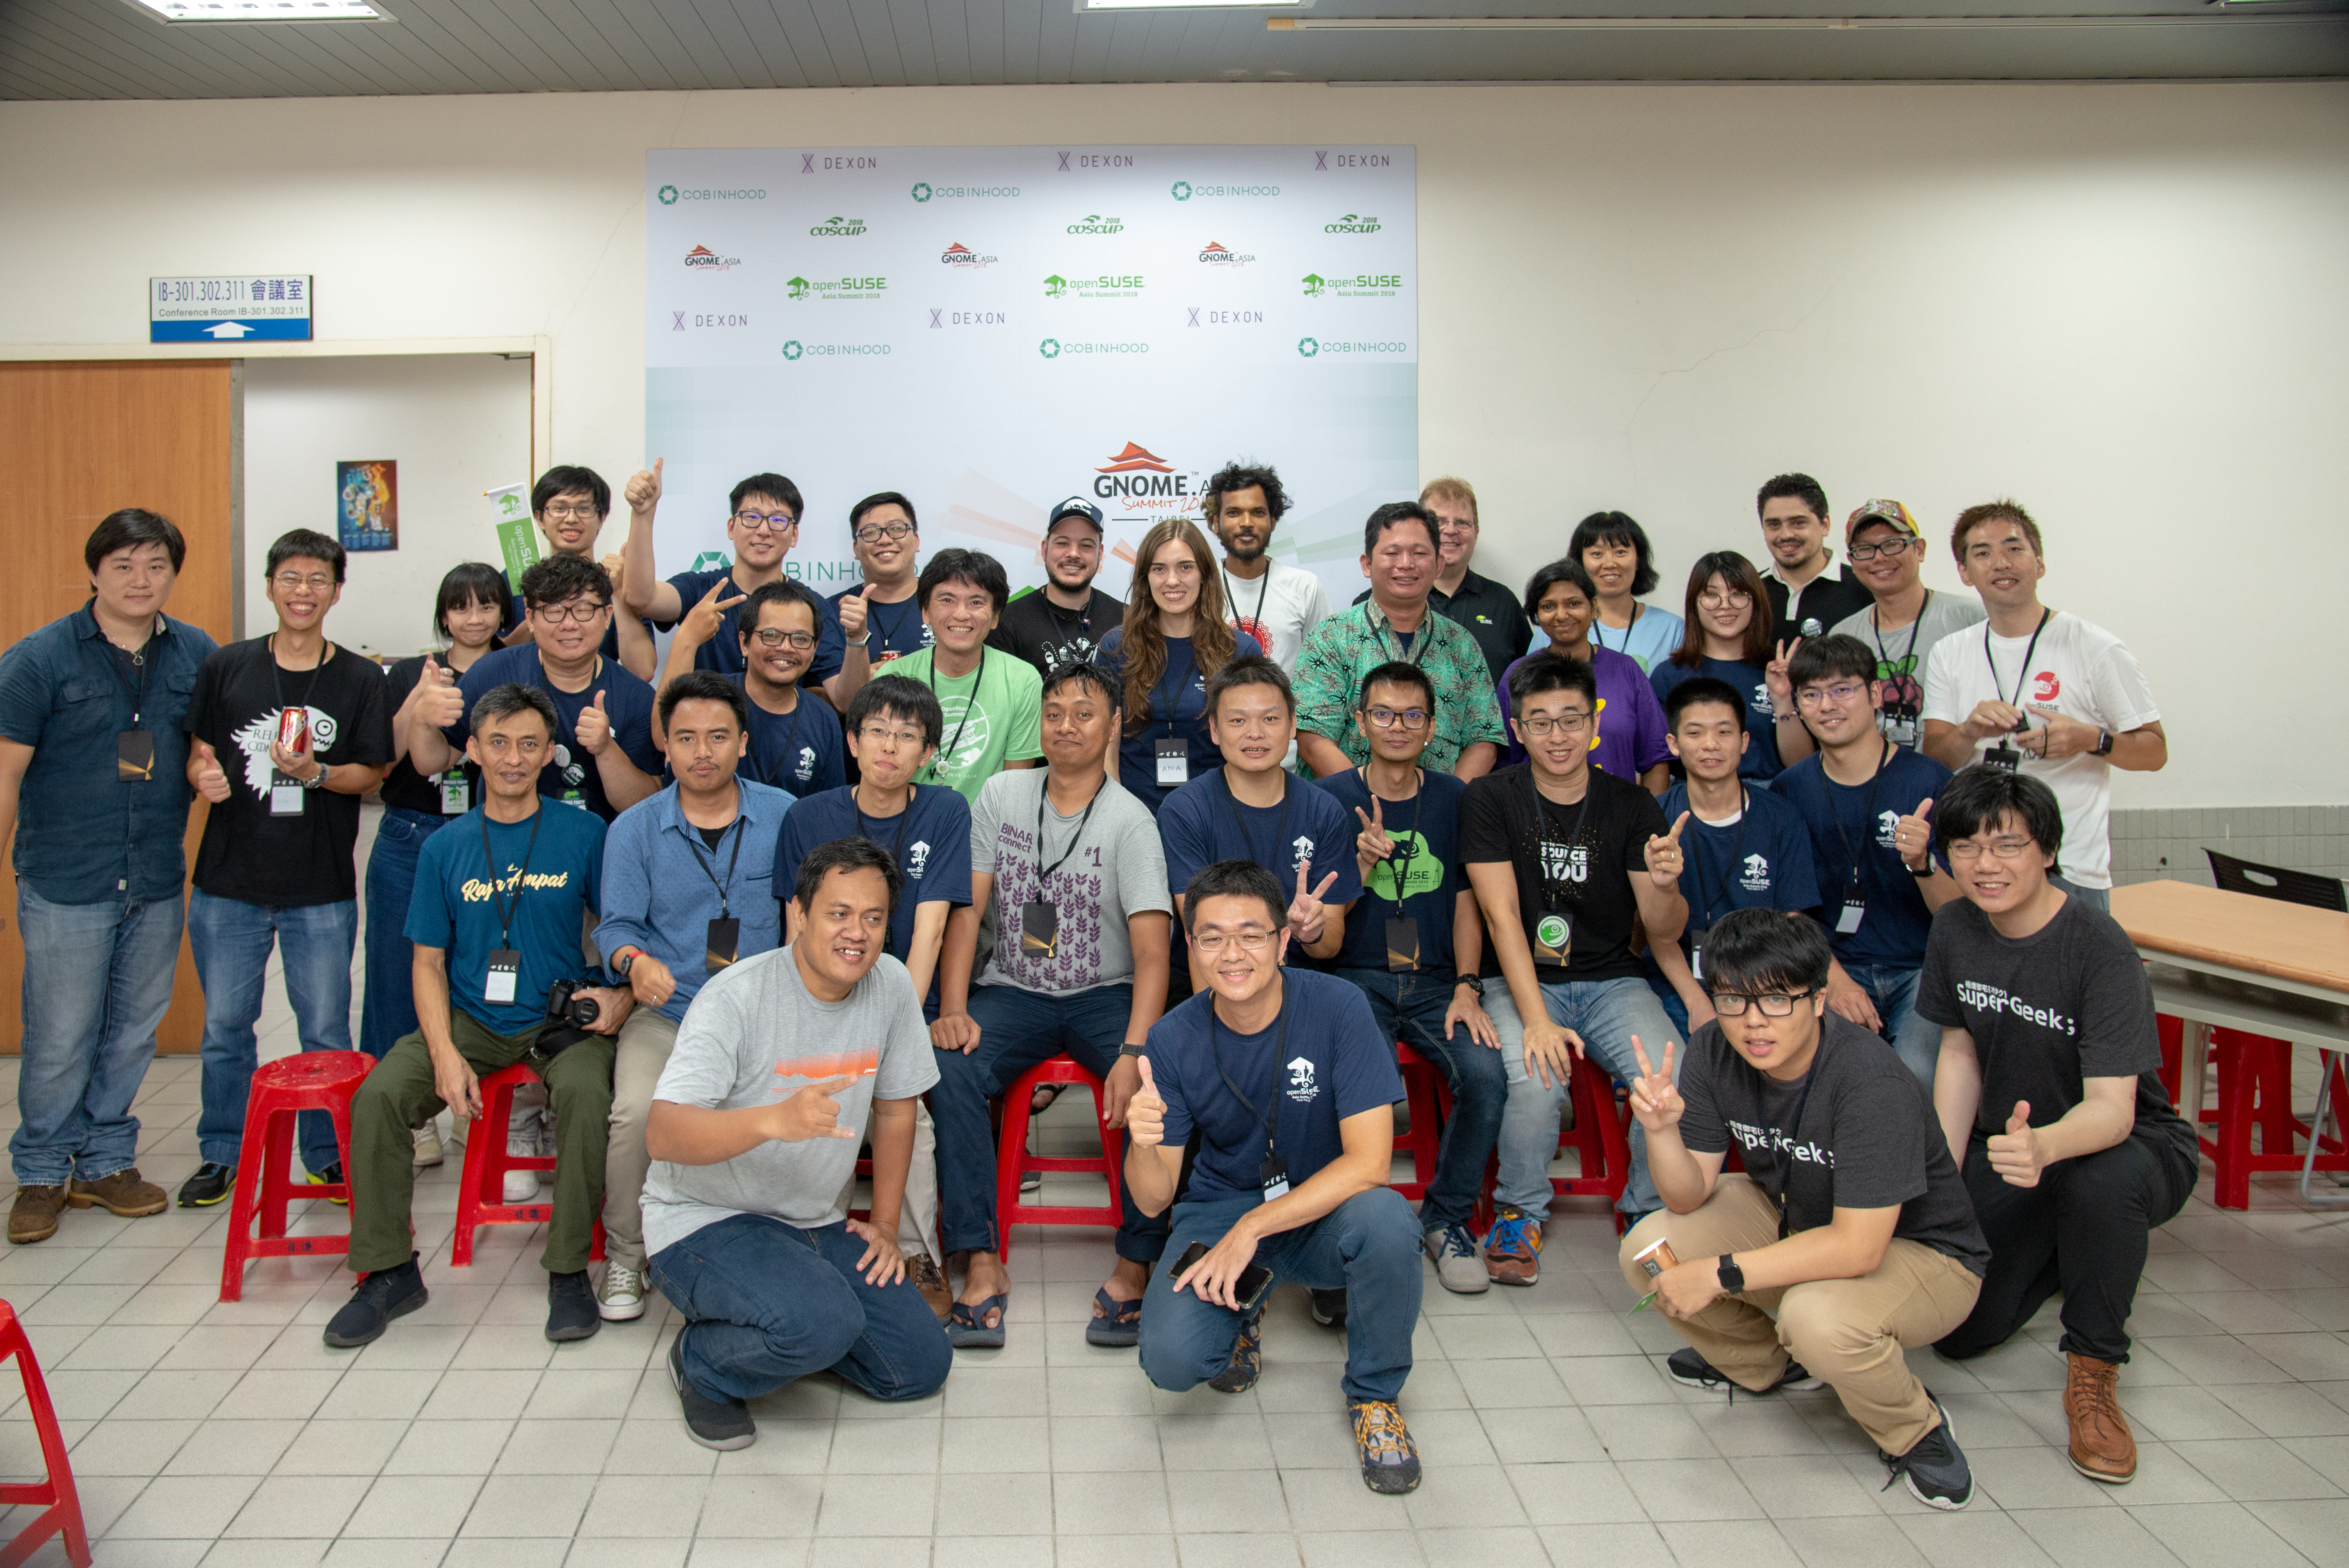 openSUSE.Asia Summit 2018 group picture